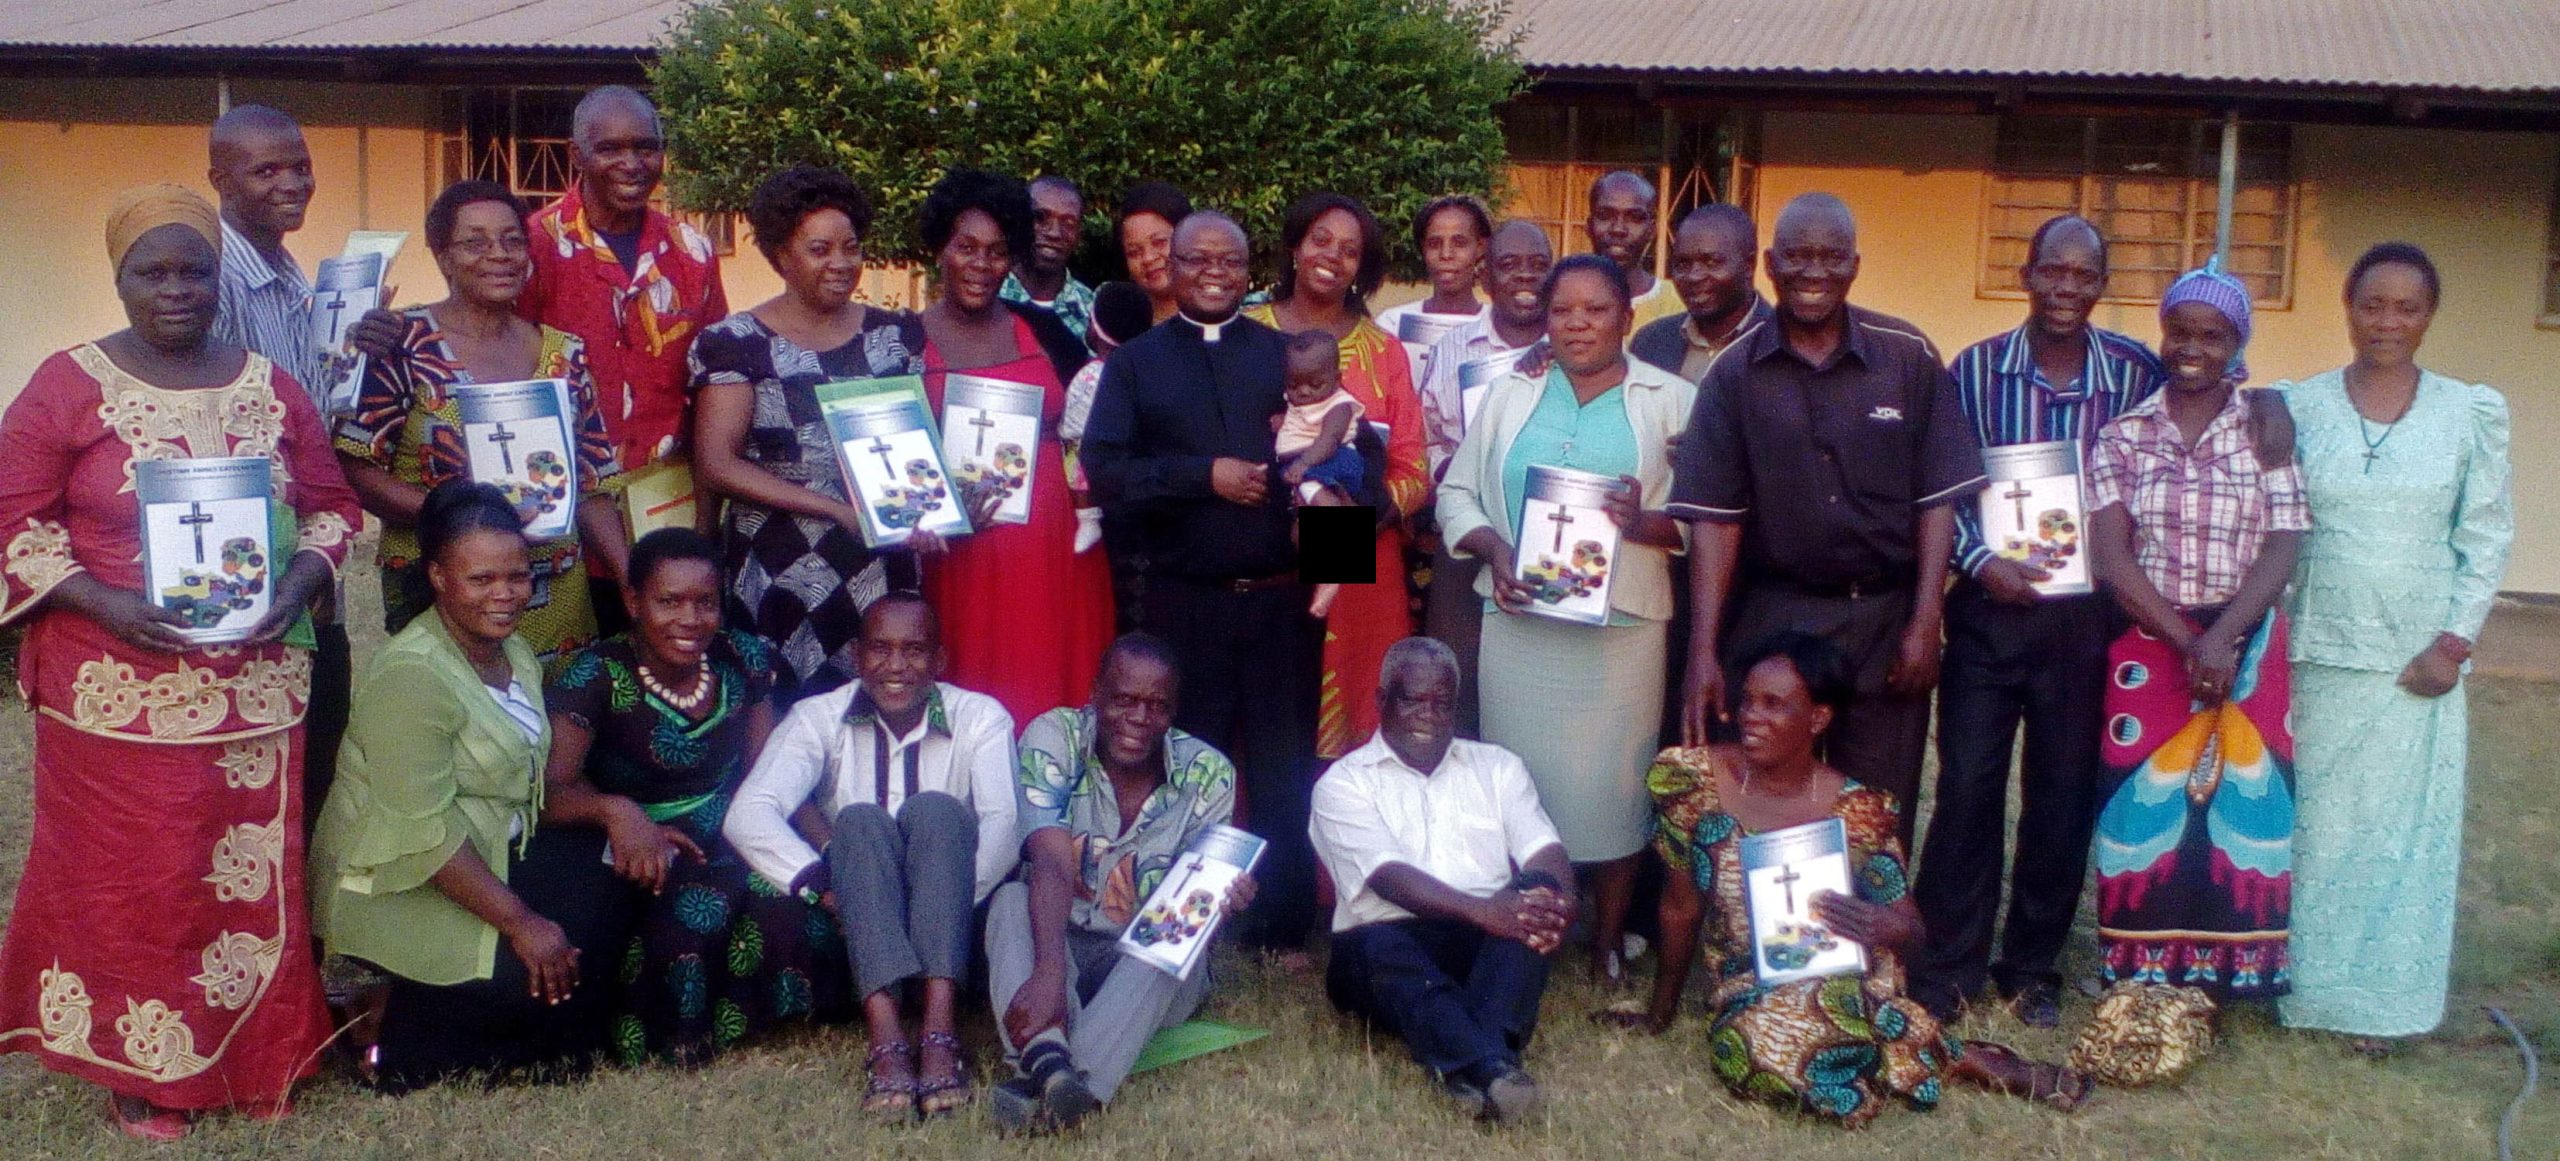 Formation of marriage and family catechists in Zambia, priest with trained couples in Kabwe Diocese